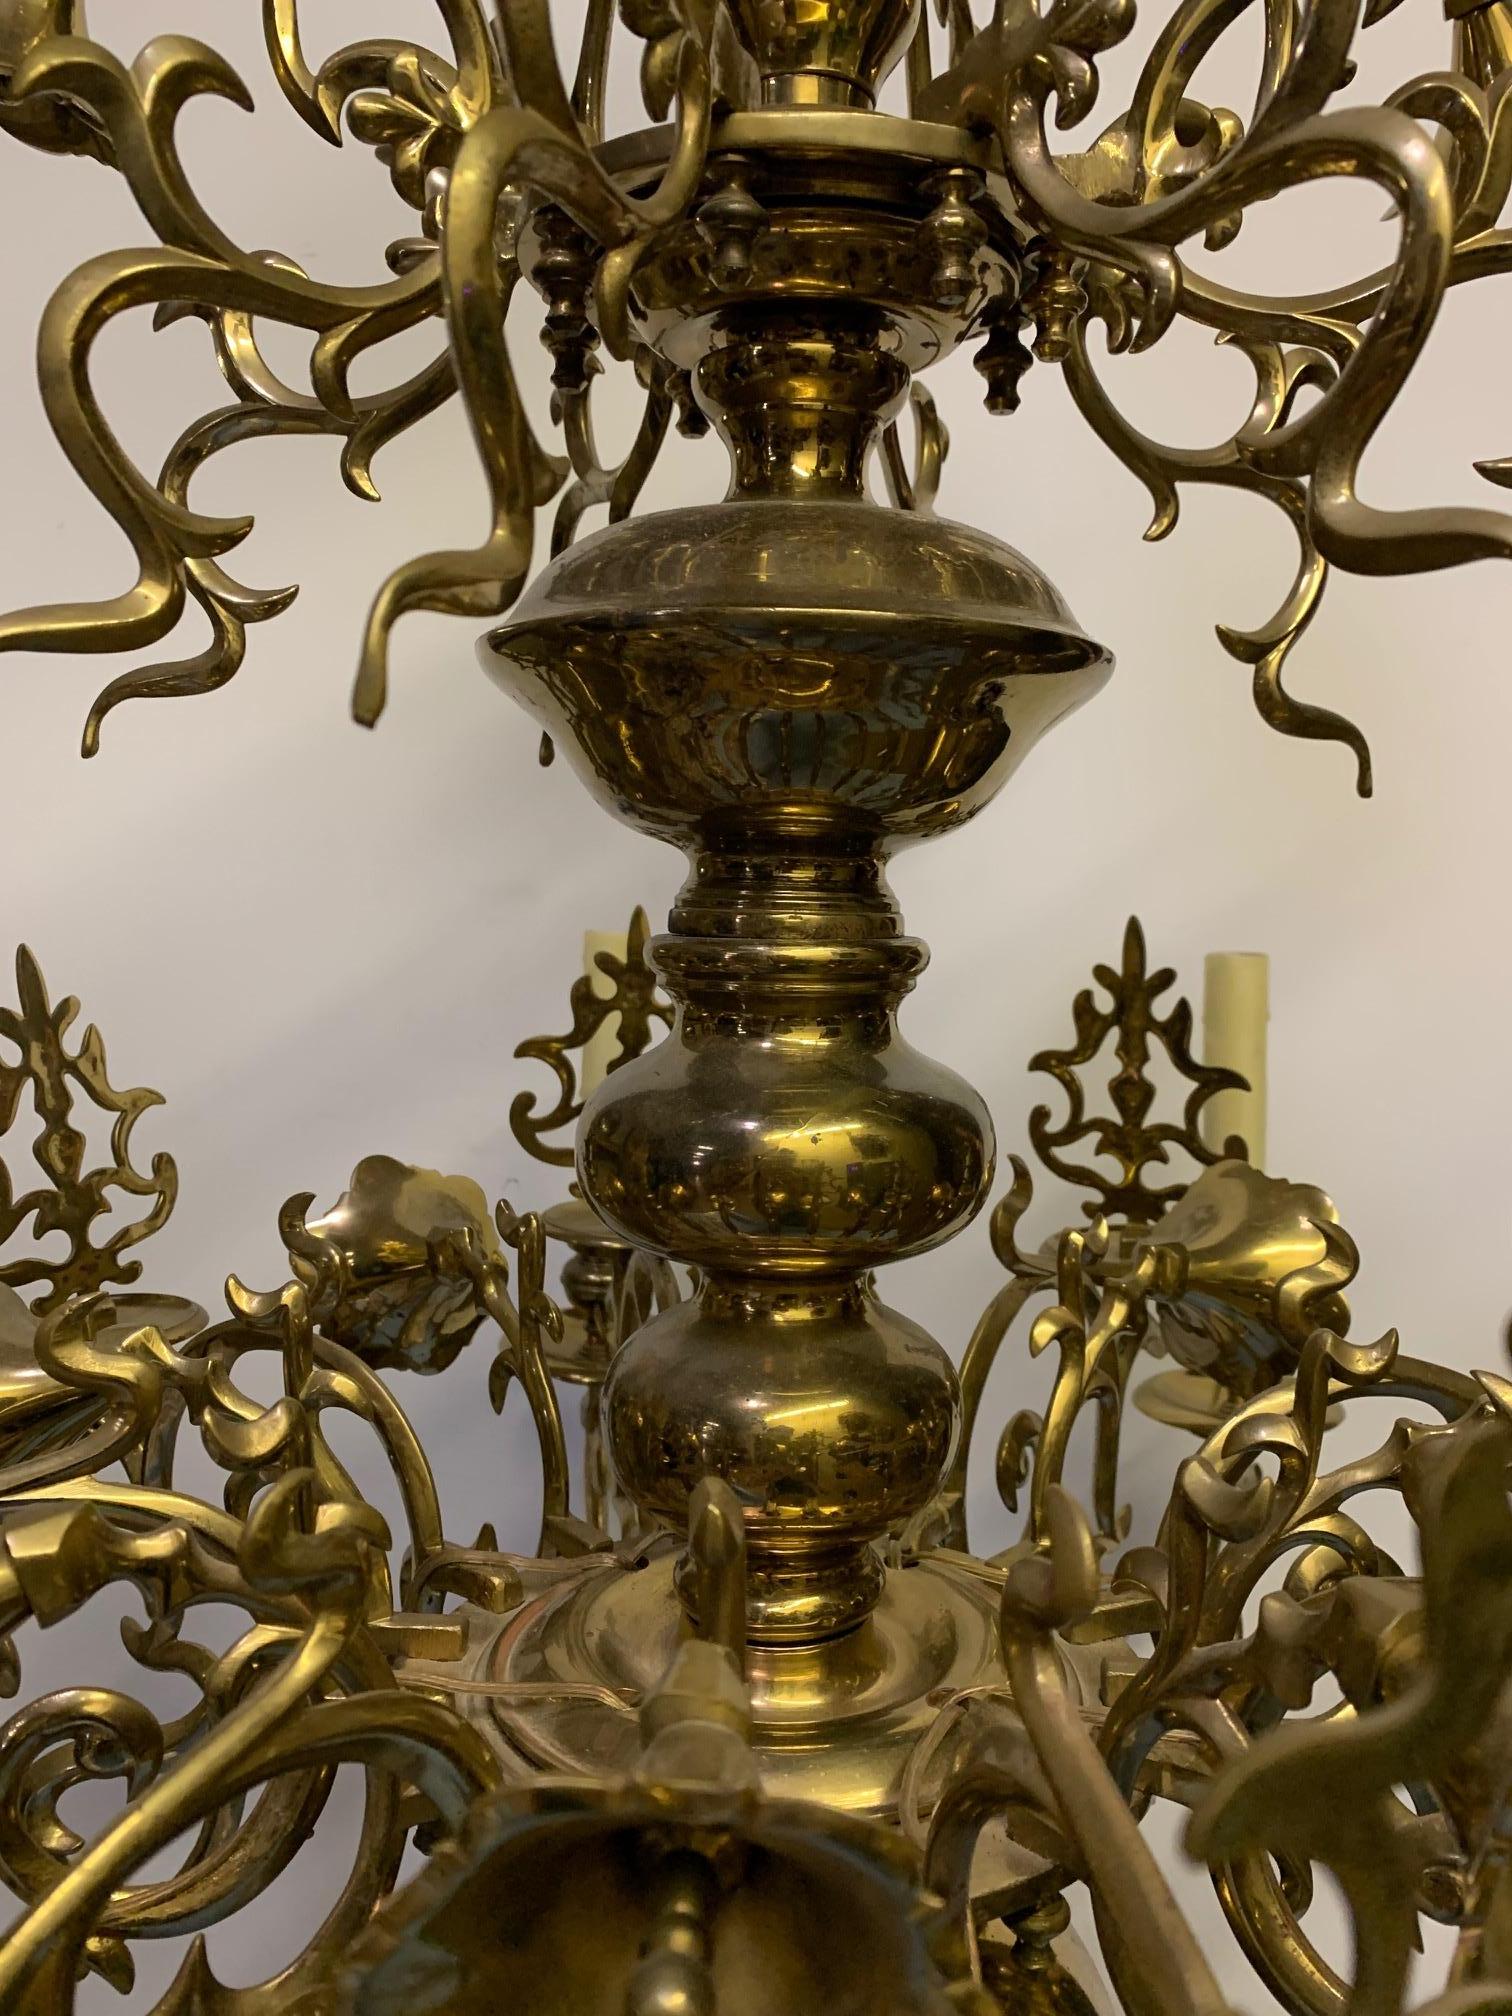 Flemmish brass eight light 19th century chandelier. This Baroque style eight light chandelier has a beautiful golden patina and has a floral motif.